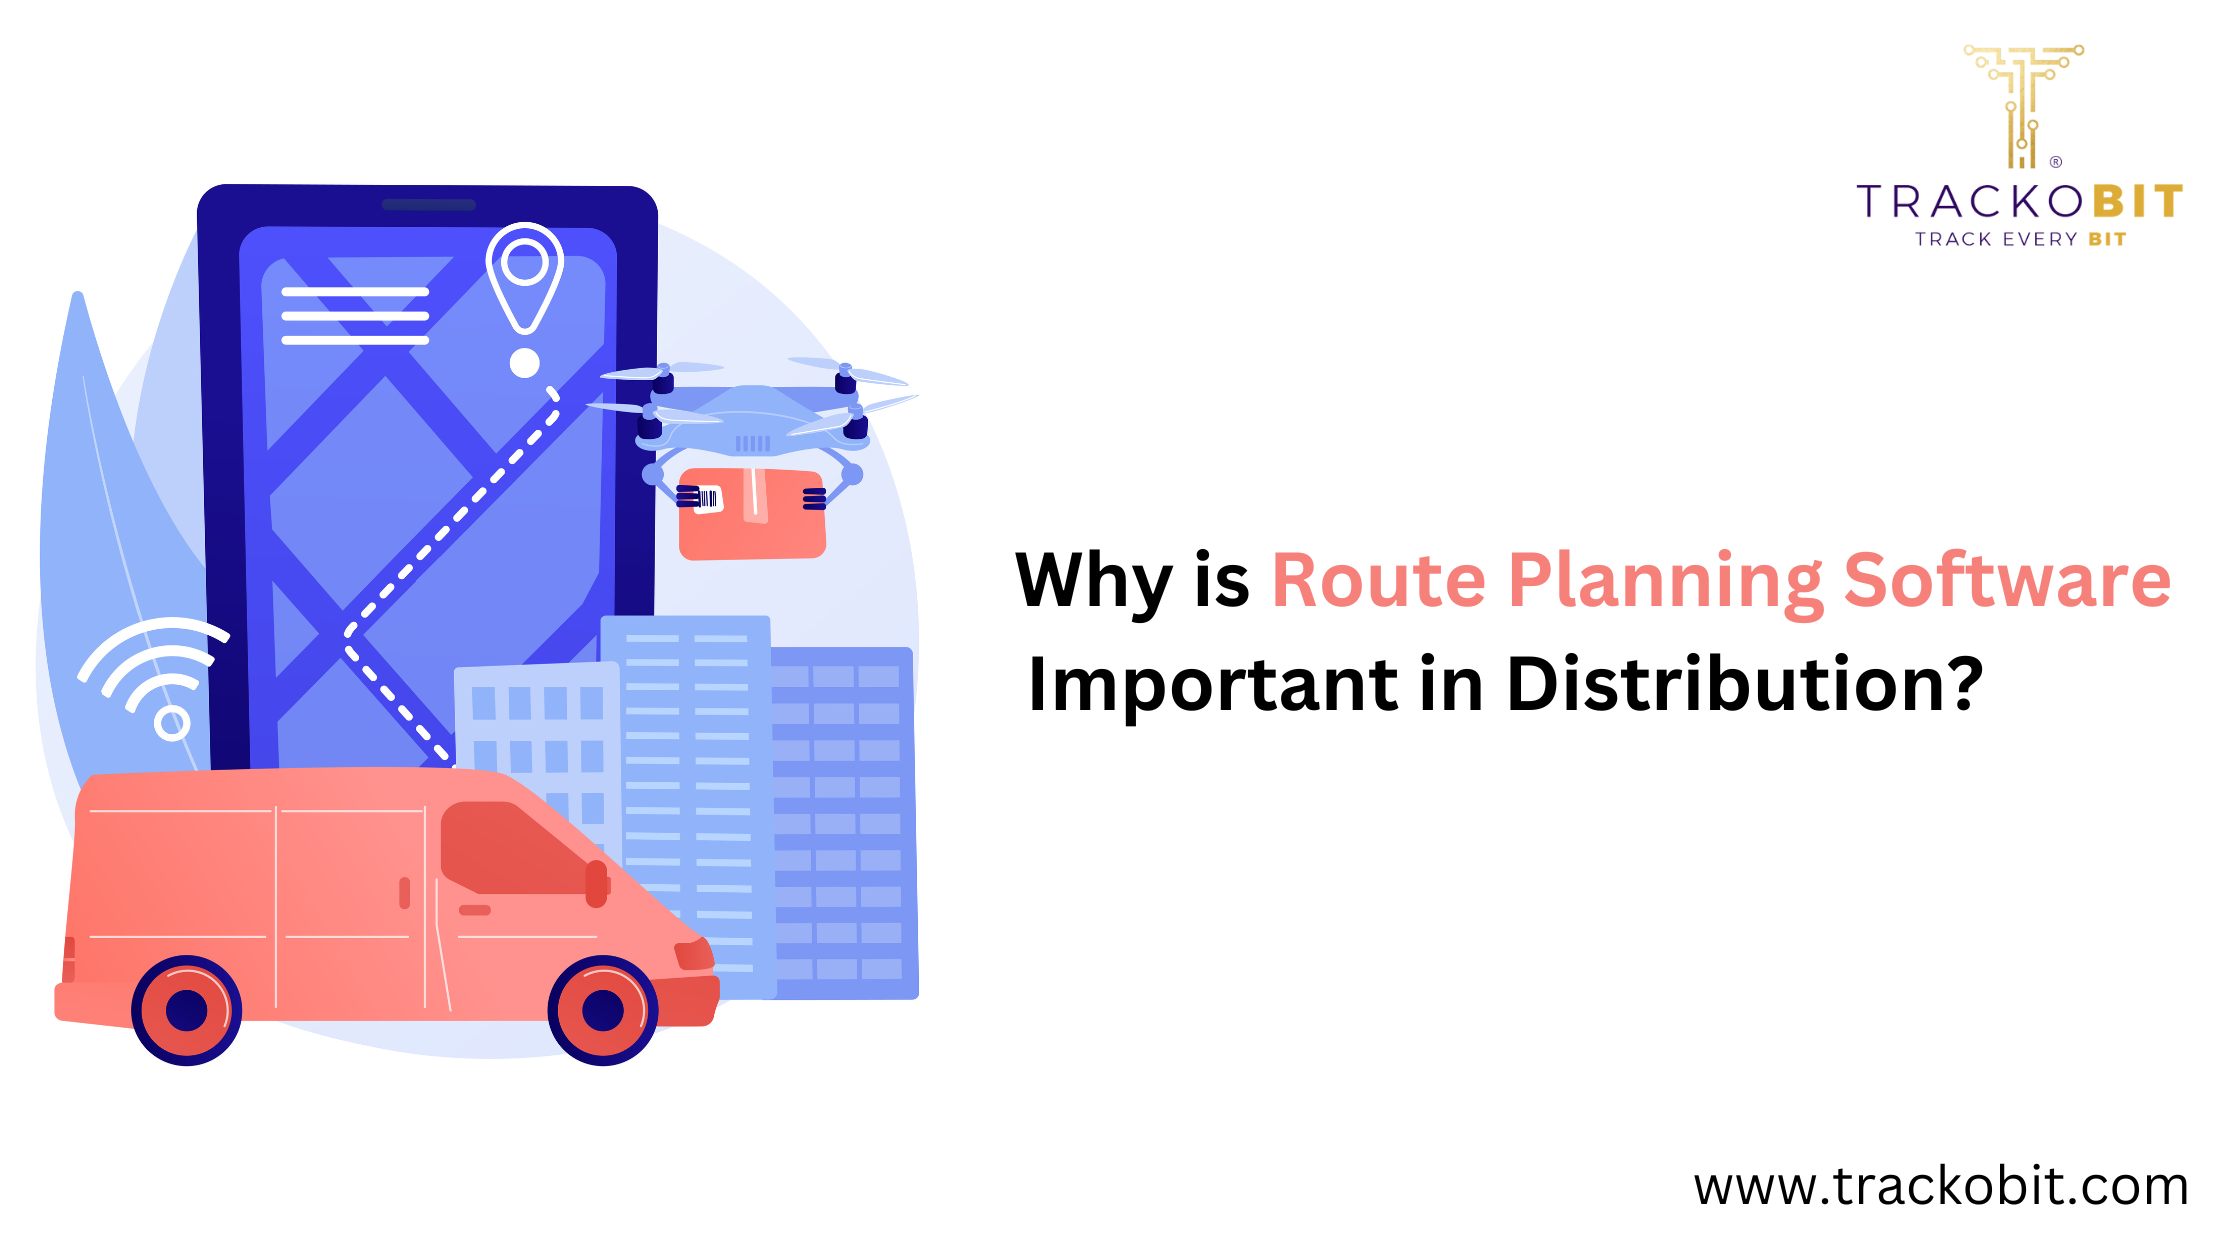 Why is Route Planning Software Important in Distribution?